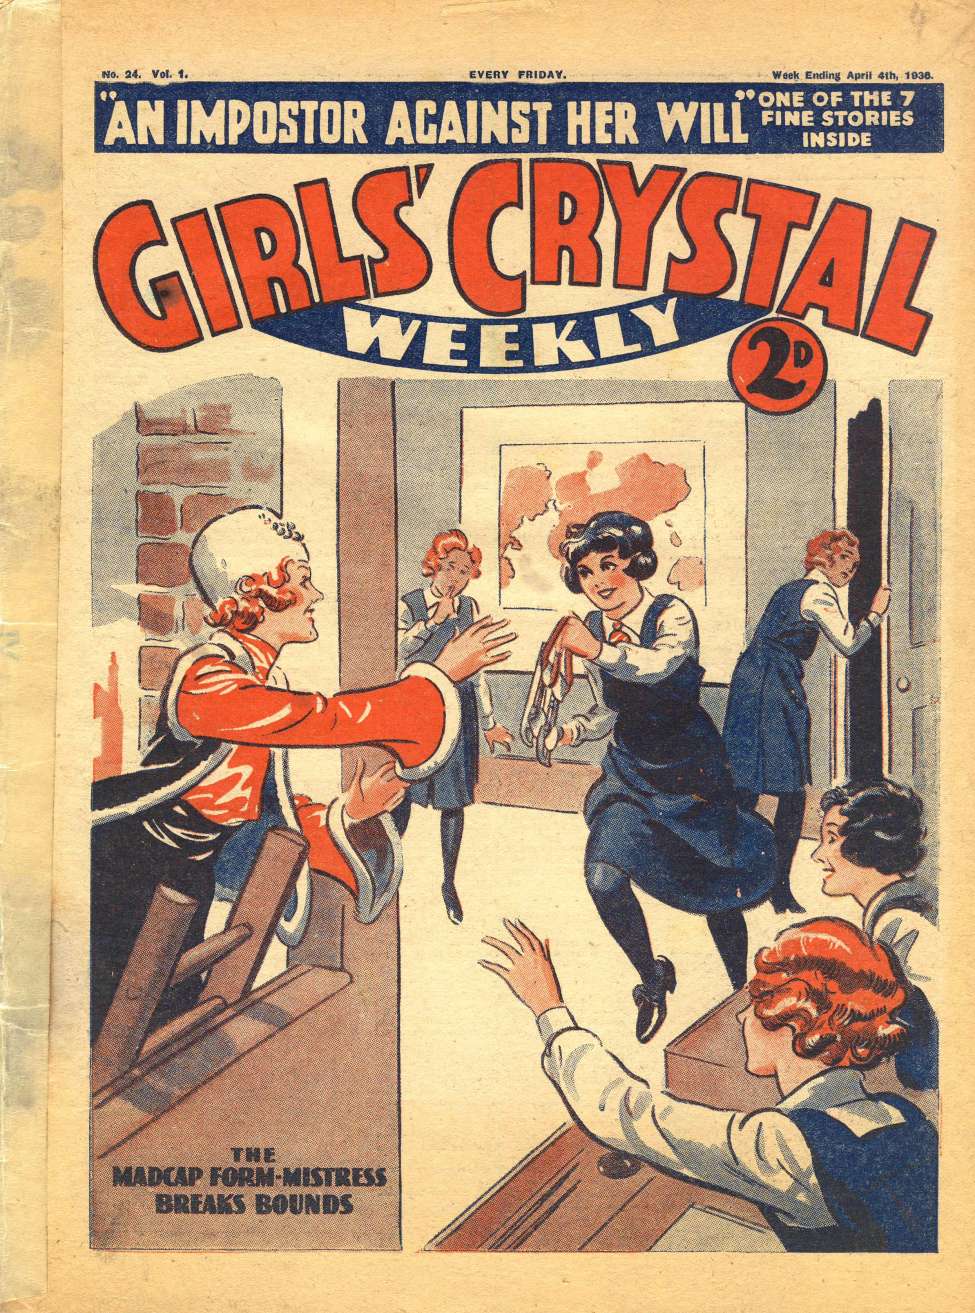 Book Cover For Girls' Crystal 24 - Madcap Form-Mistress Breaks Bounds